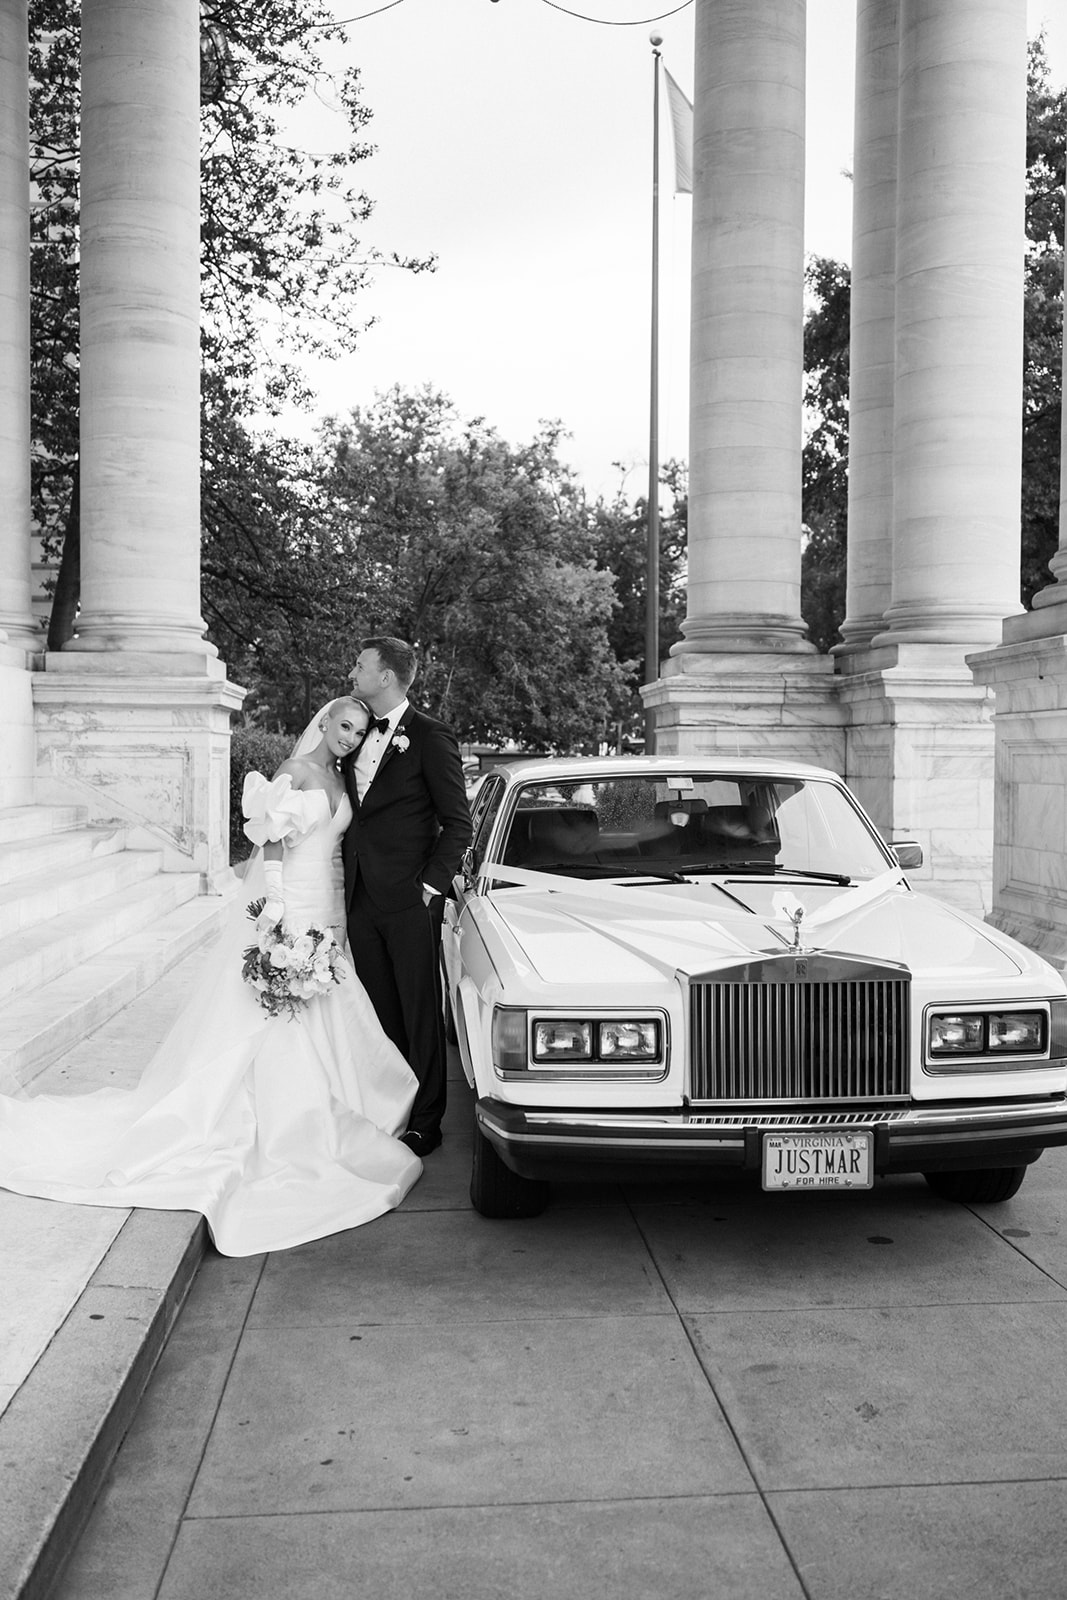 Bride and groom have a moment next to classic Rolls Royce at DC wedding